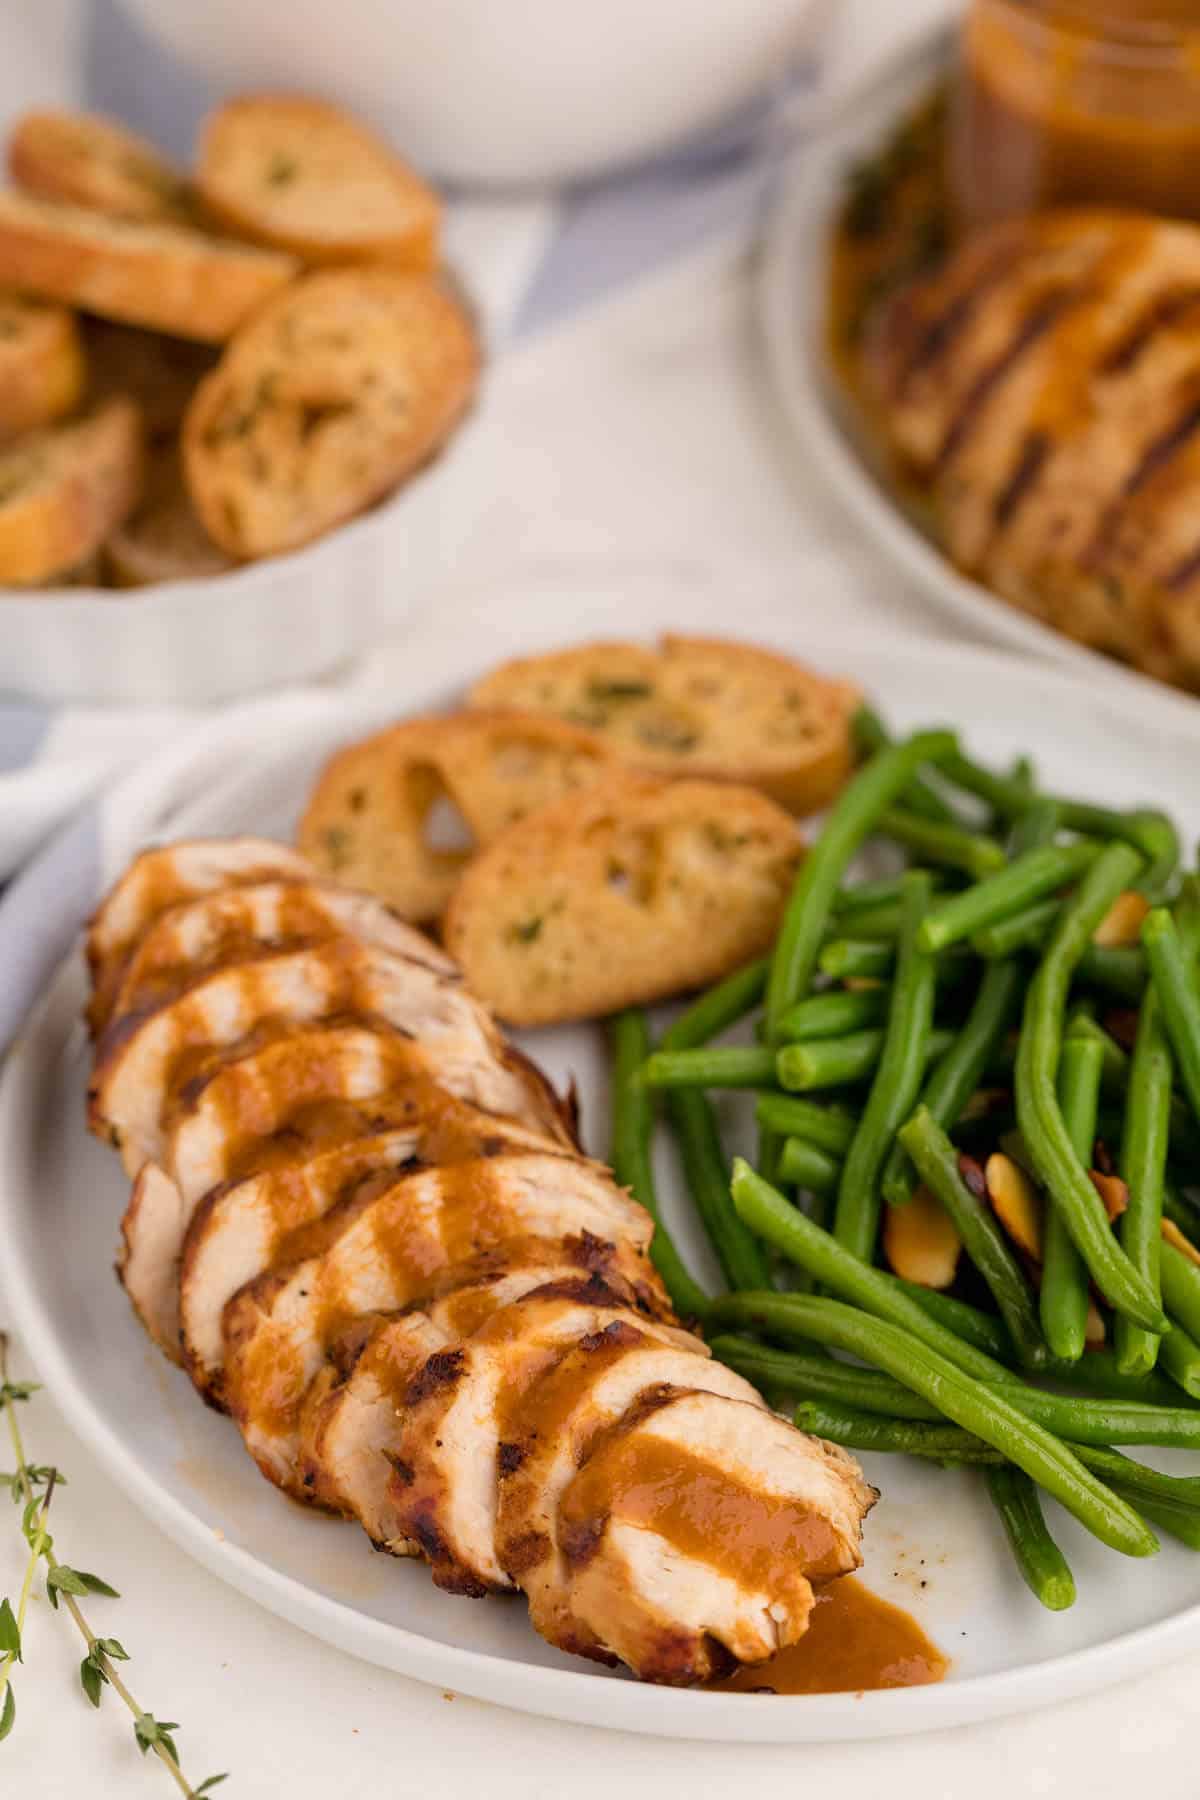 Sliced grilled herb chicken on a plate with garlic bread and green beans.